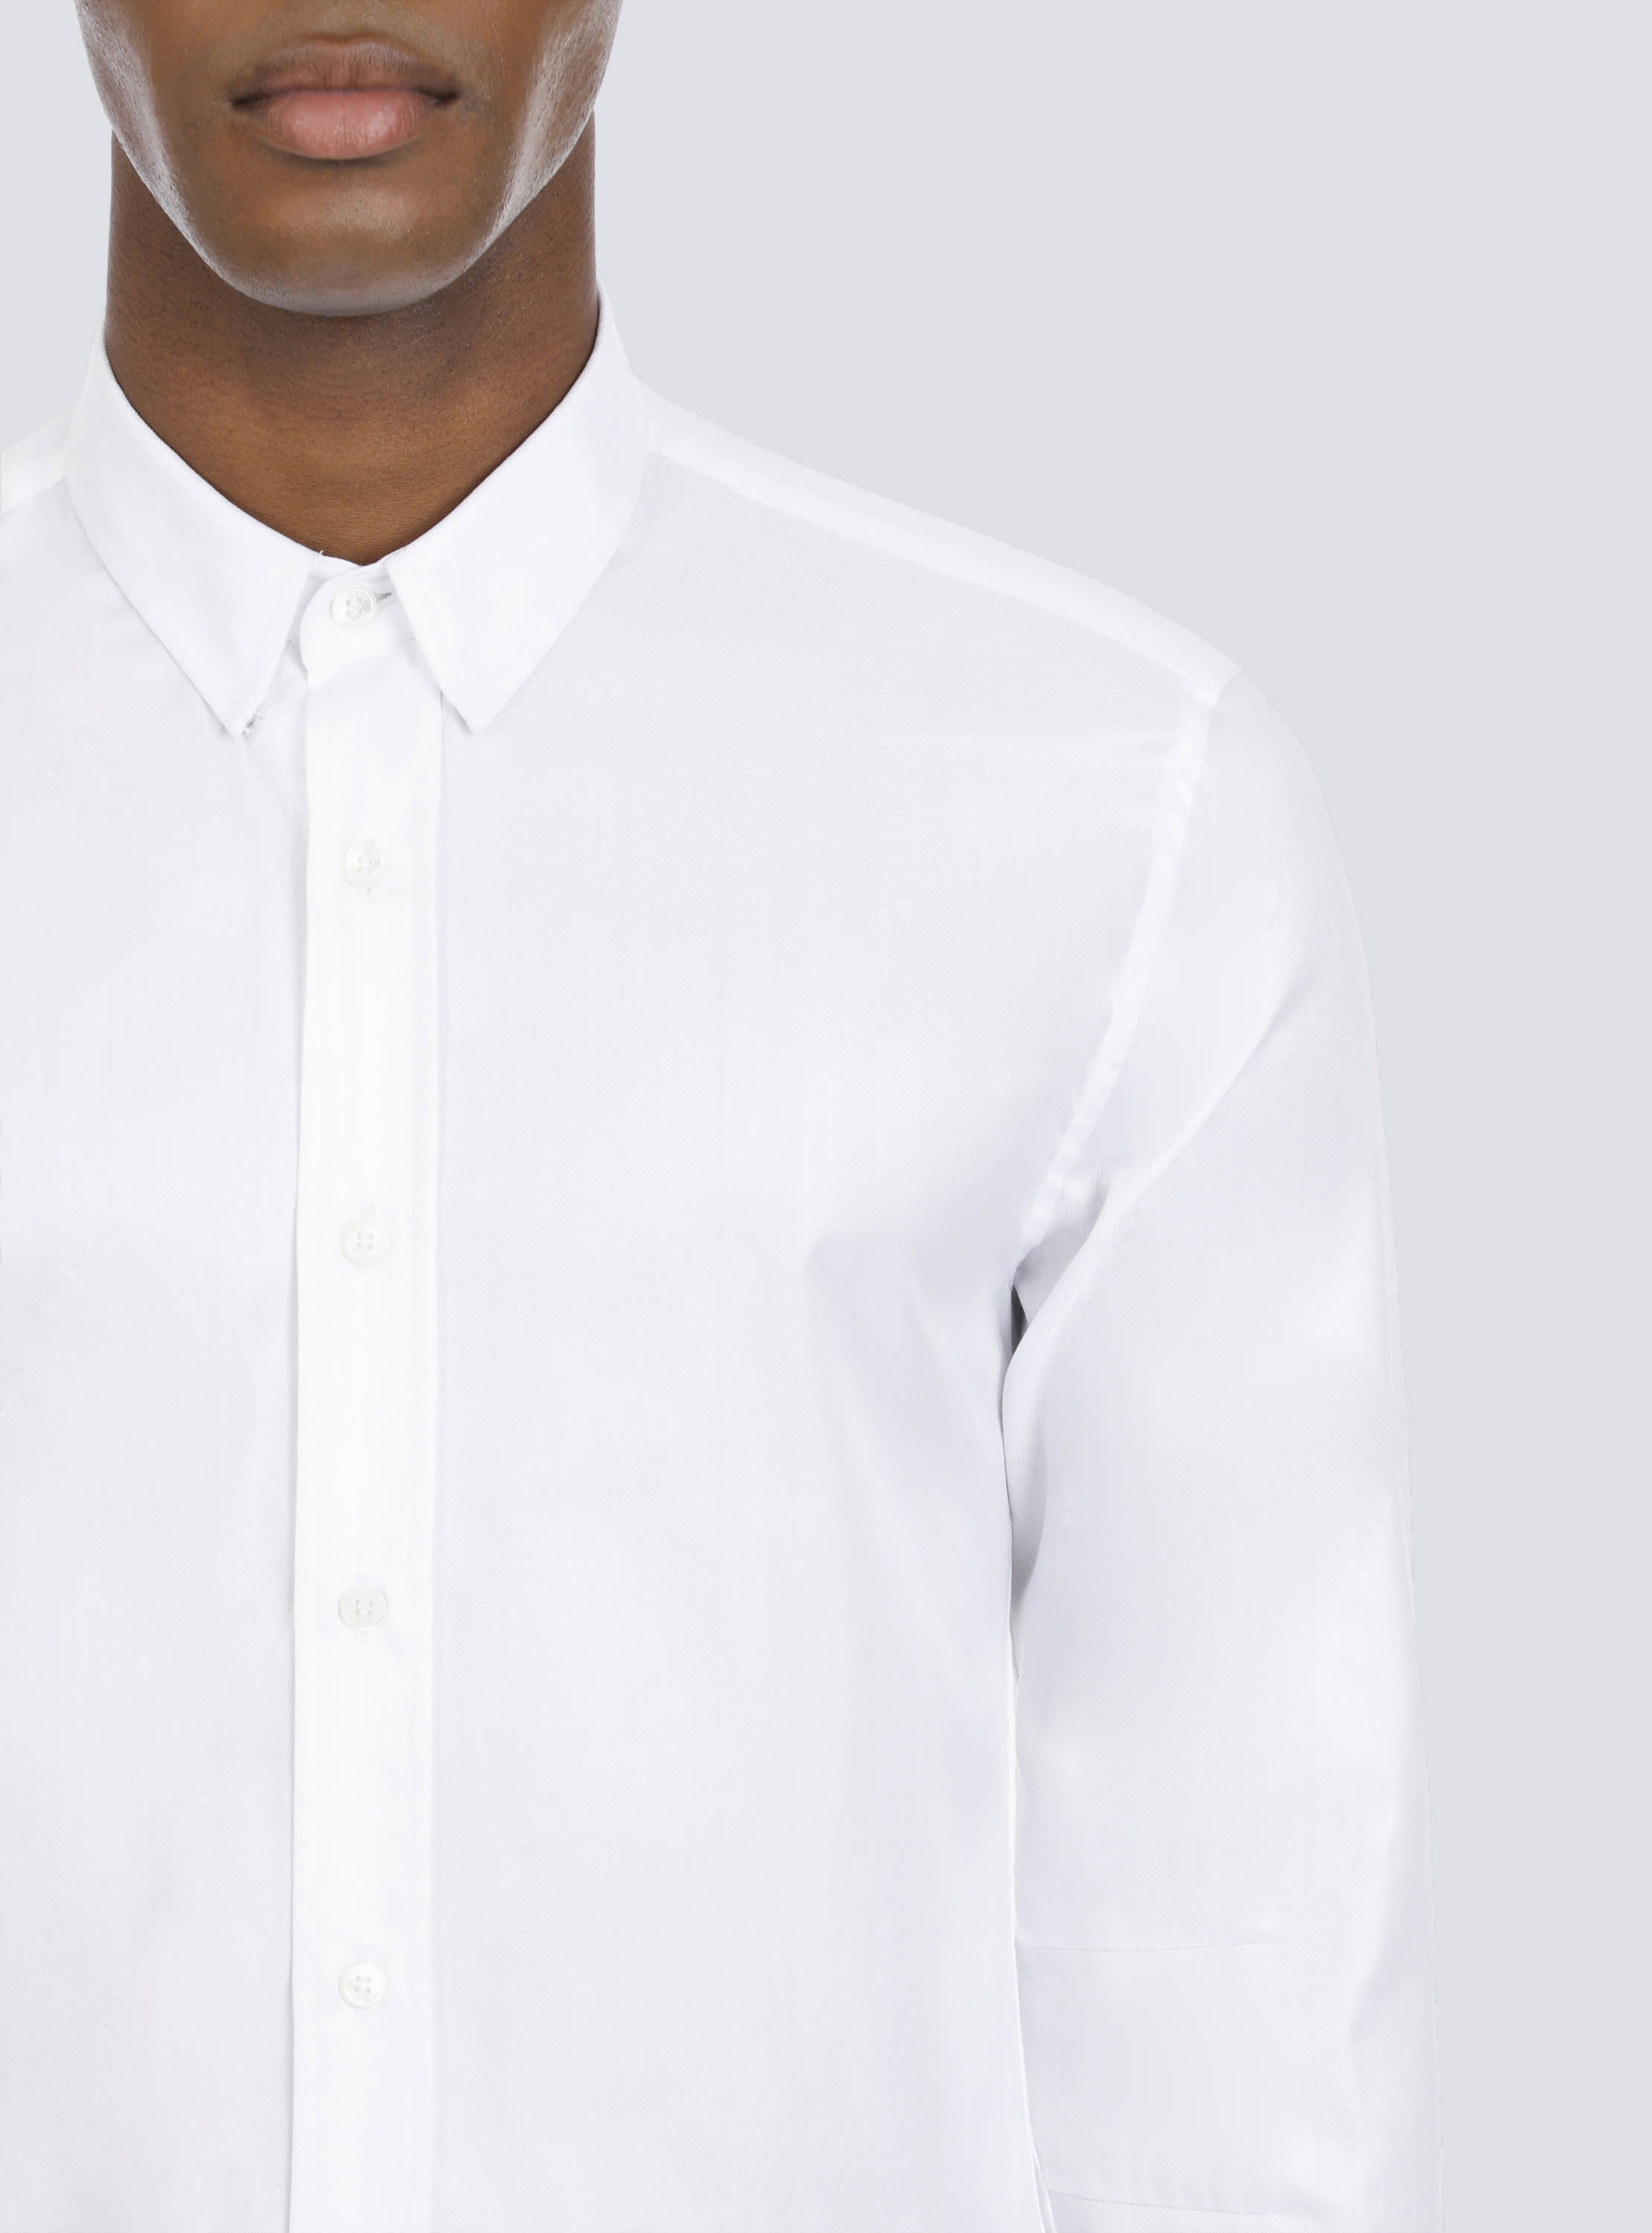 Fitted white cotton shirt